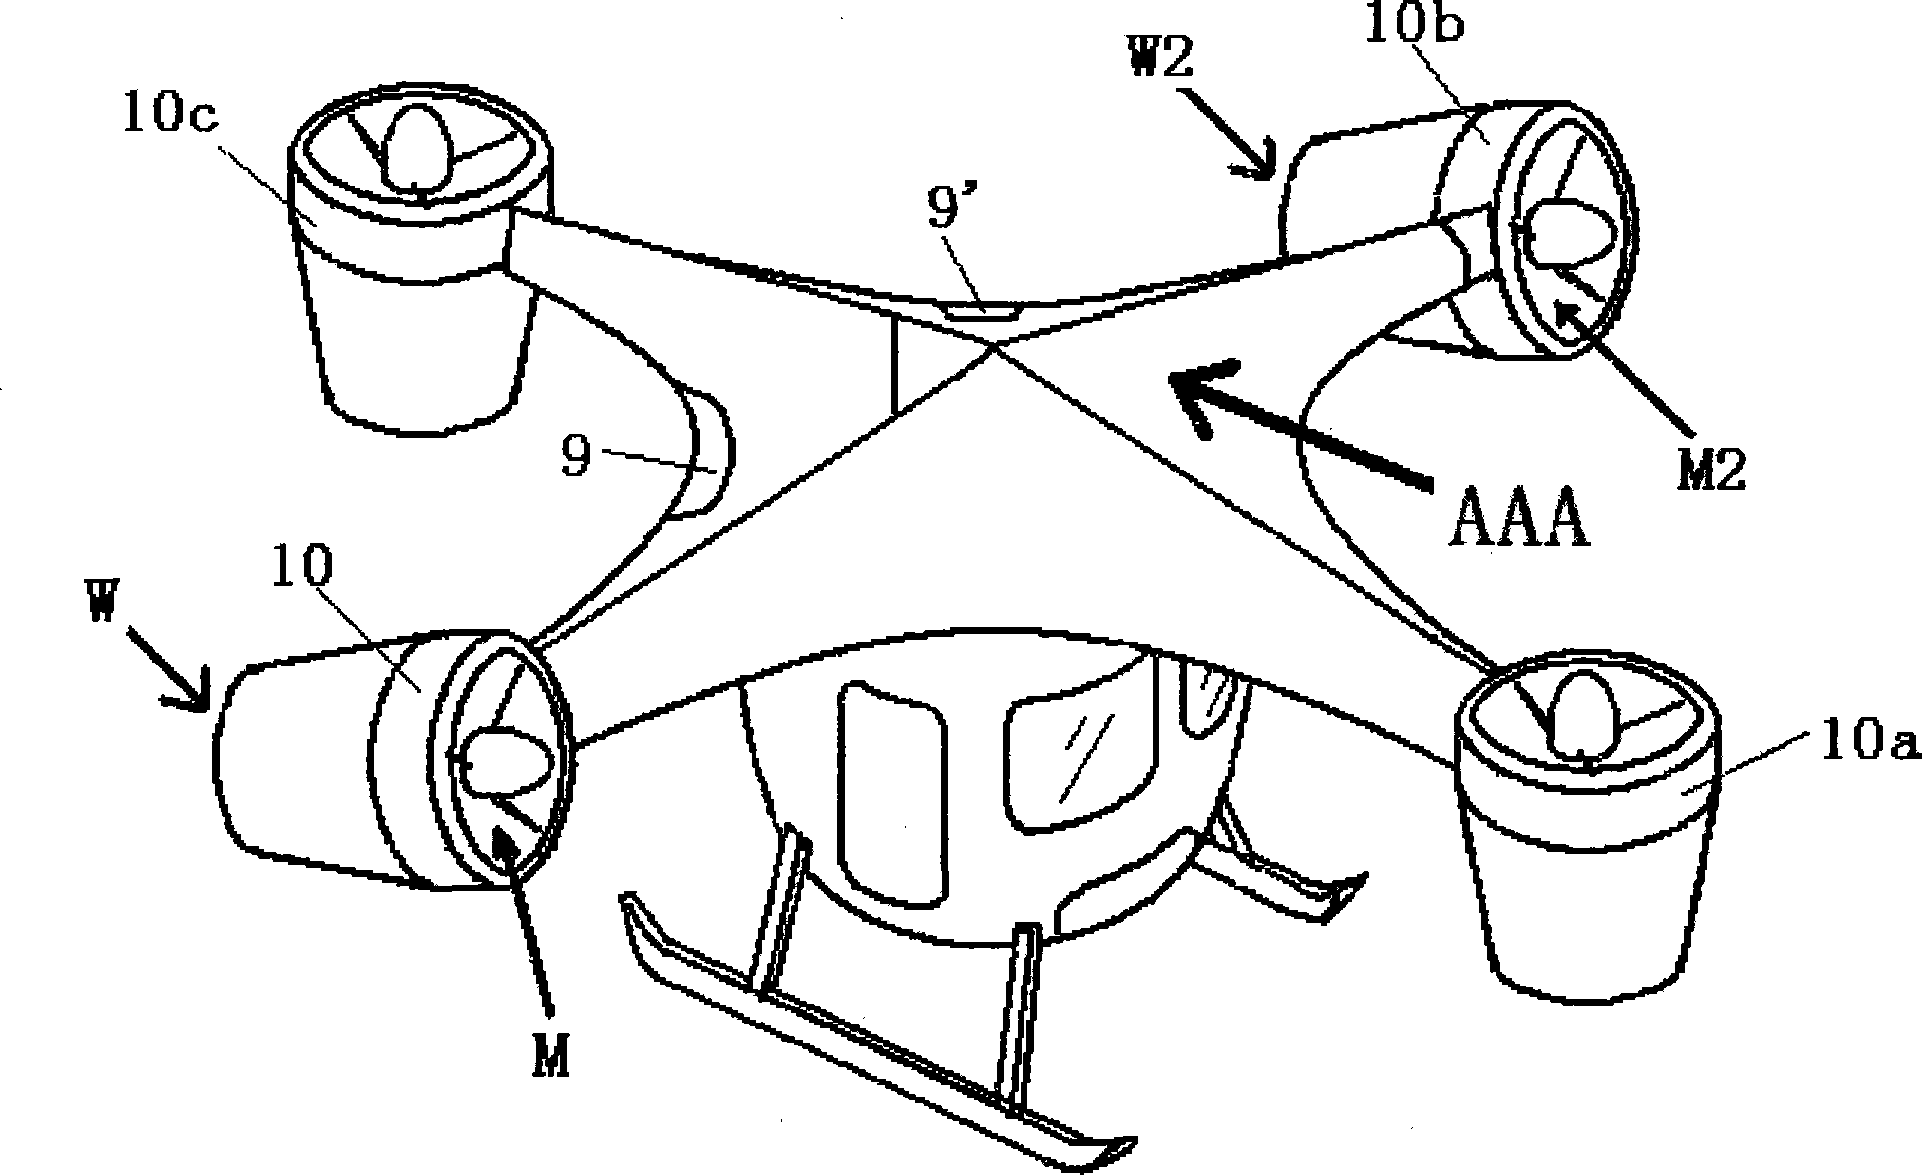 Novel air injection aerial vehicle